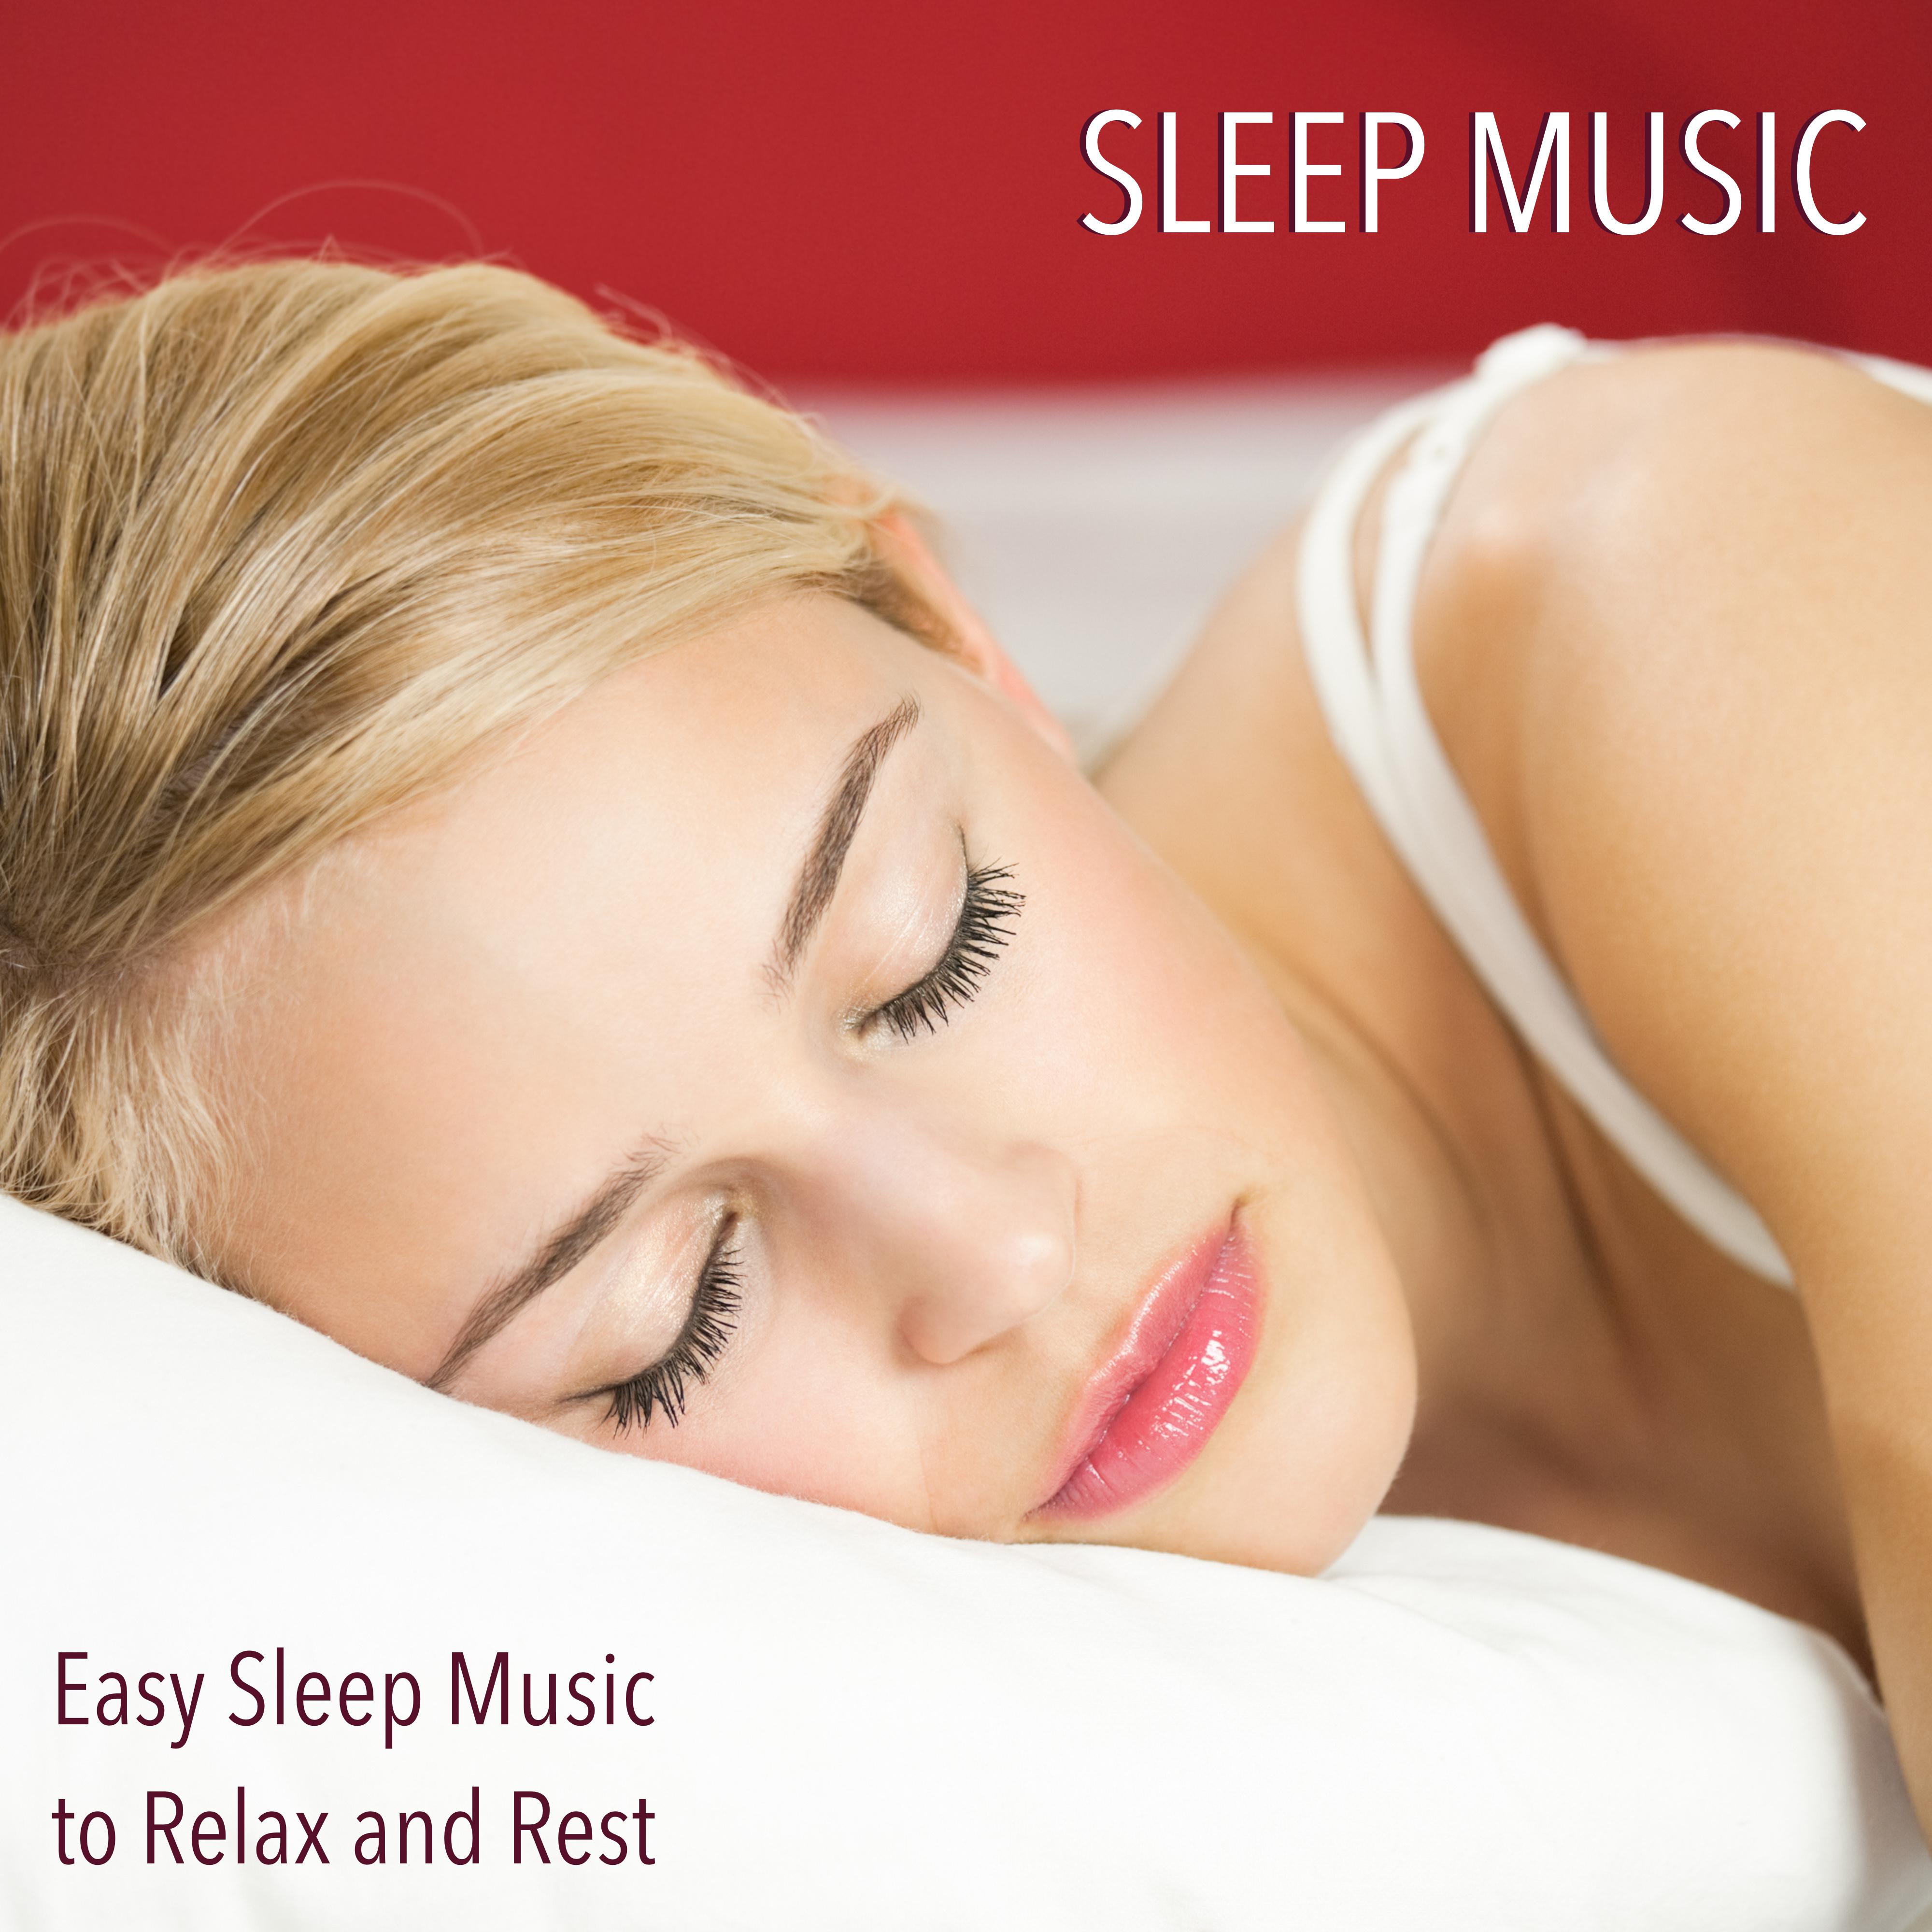 Sleep Music - Easy Sleep Music to Relax and Rest